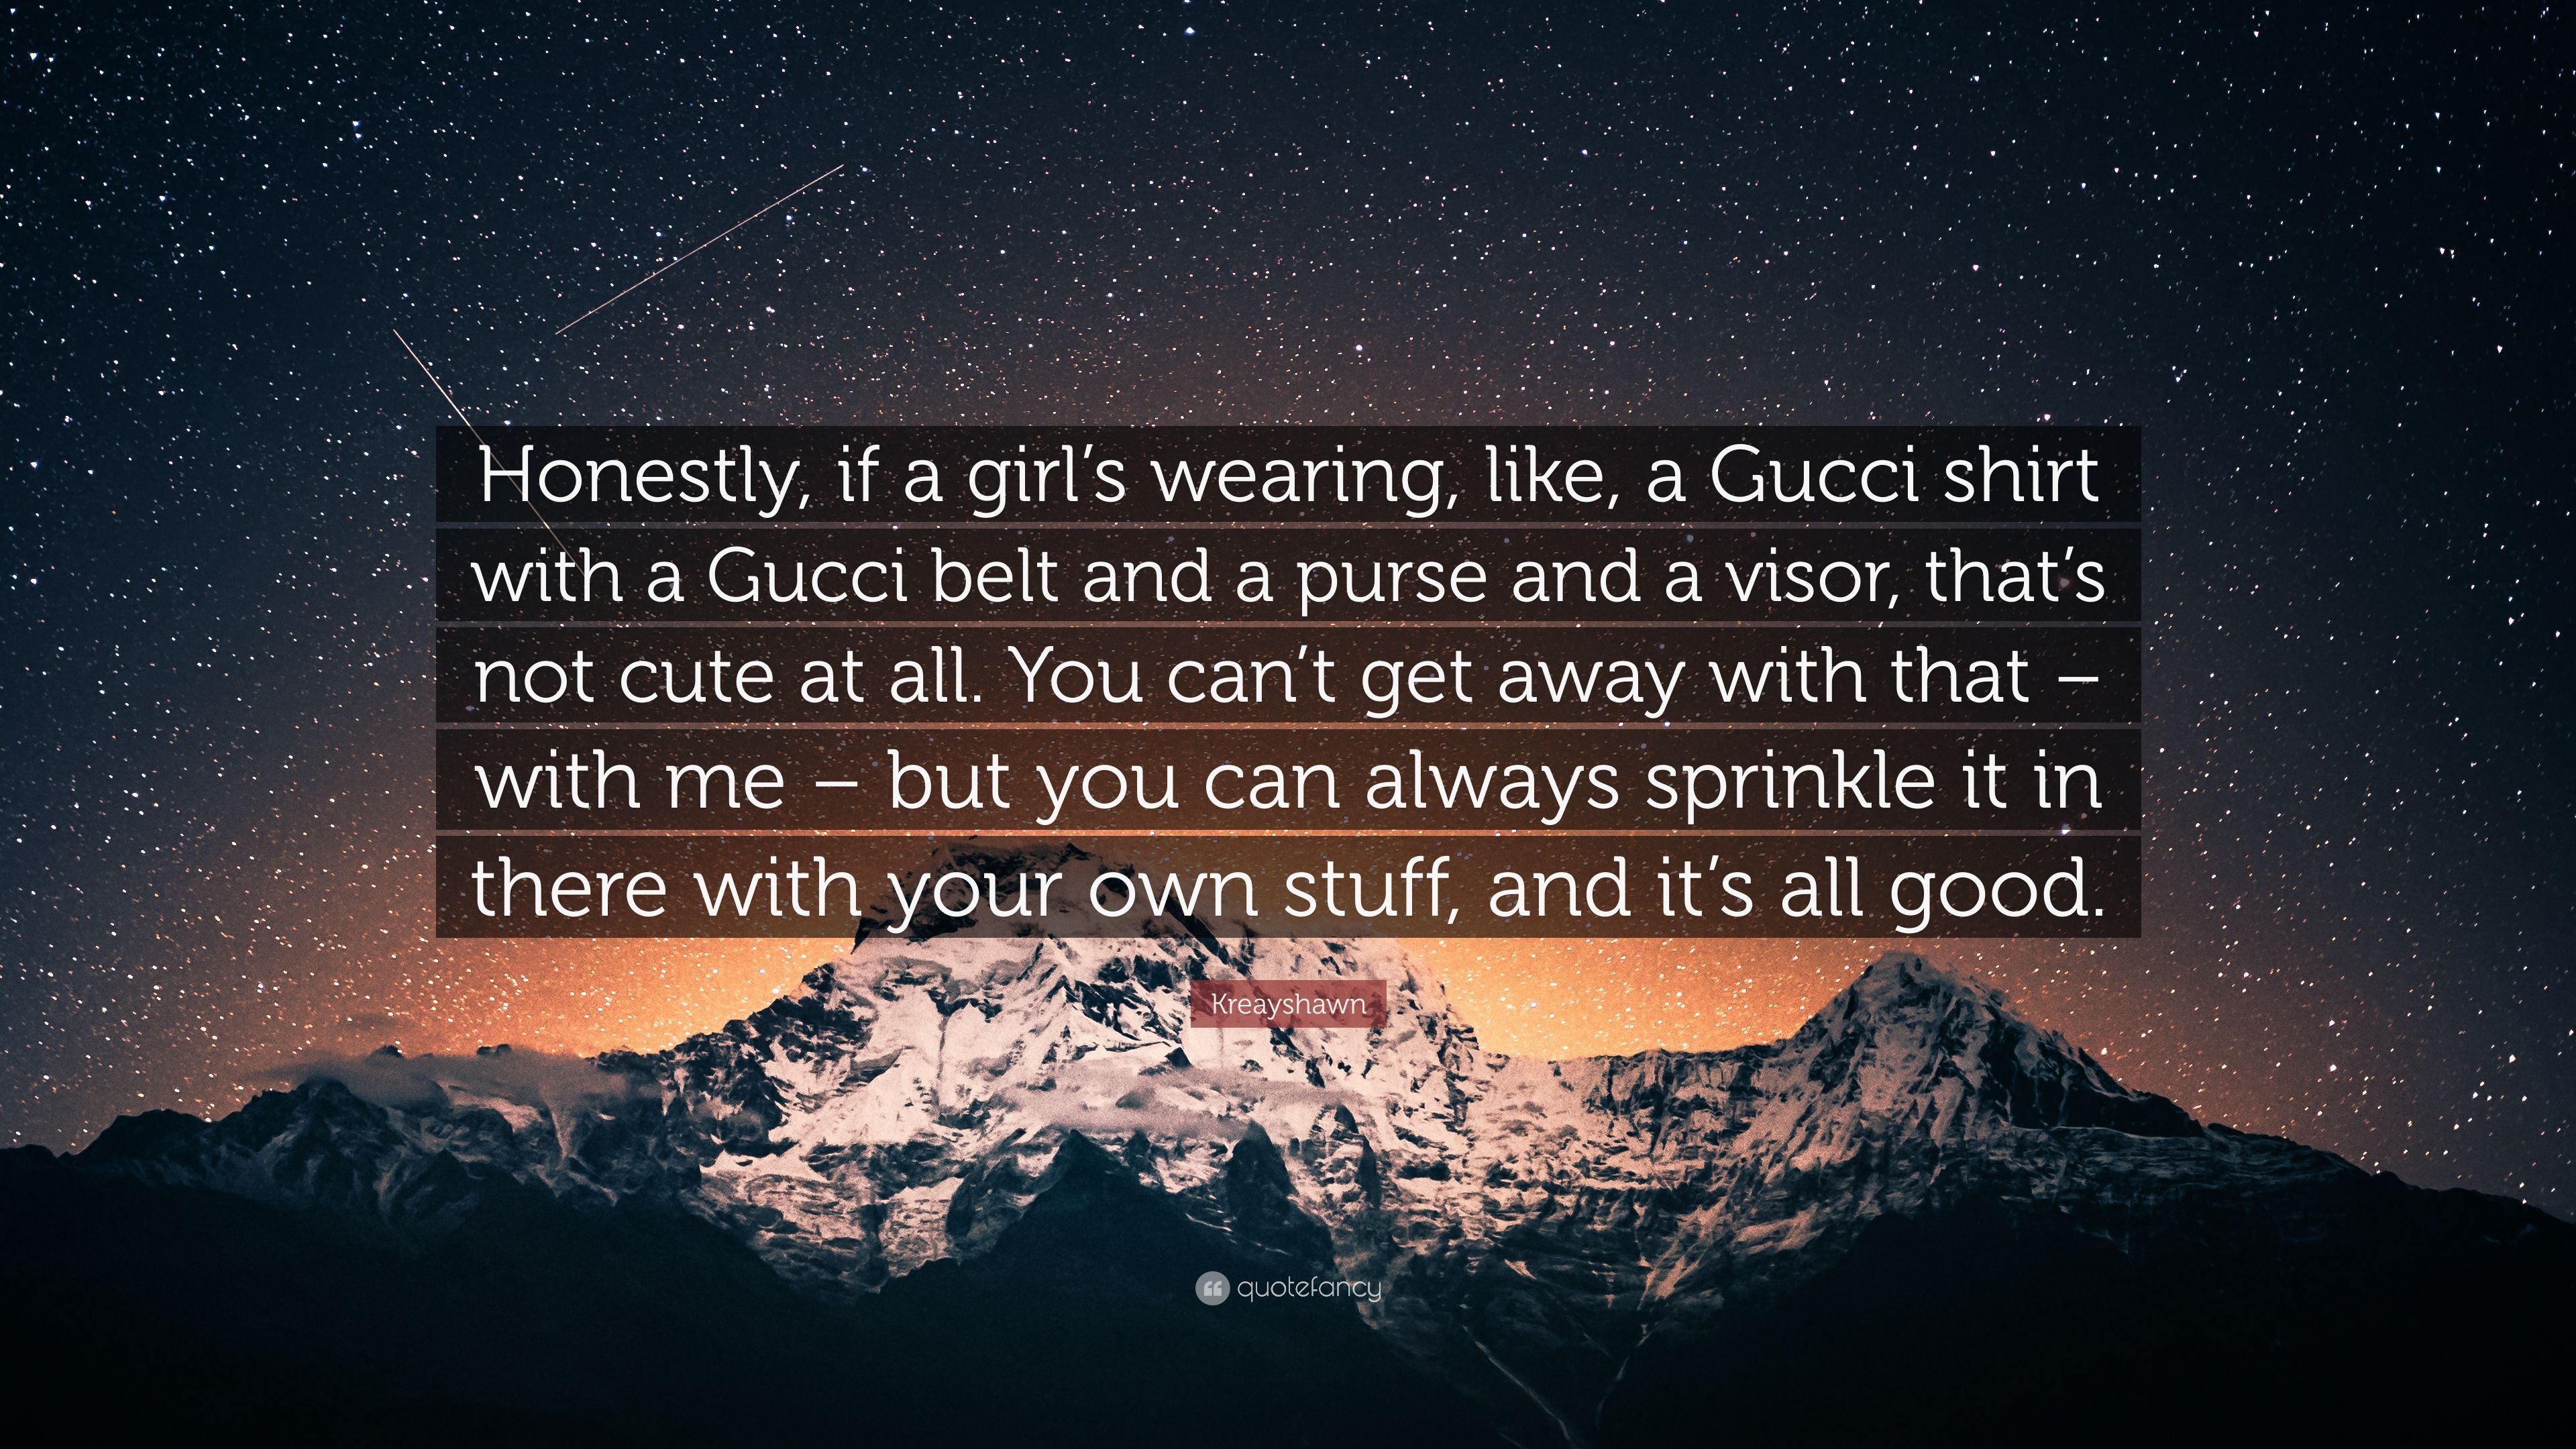 Kreayshawn Quote: “Honestly, if a girl's wearing, like, a Gucci shirt with a Gucci belt and a purse and a visor, that's not cute at all. Yo.” (7 wallpaper)